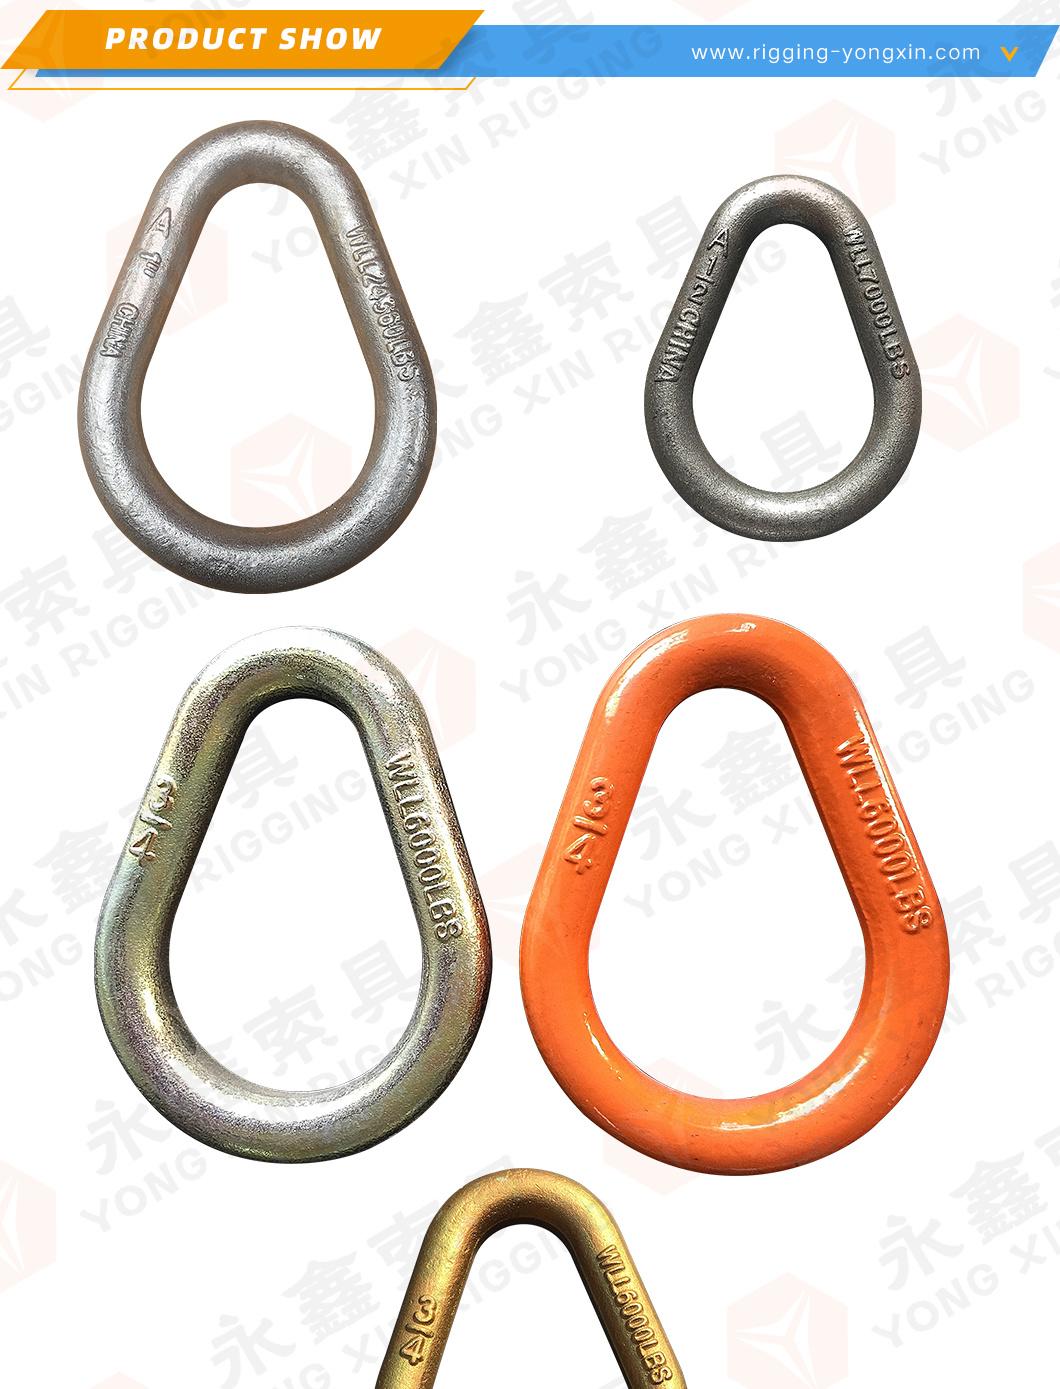 Competitive Price Alloy Steel Forged Pear Shape Master Lifting Link for Chain Lifting|Forged Pear Shape Link|Master Link